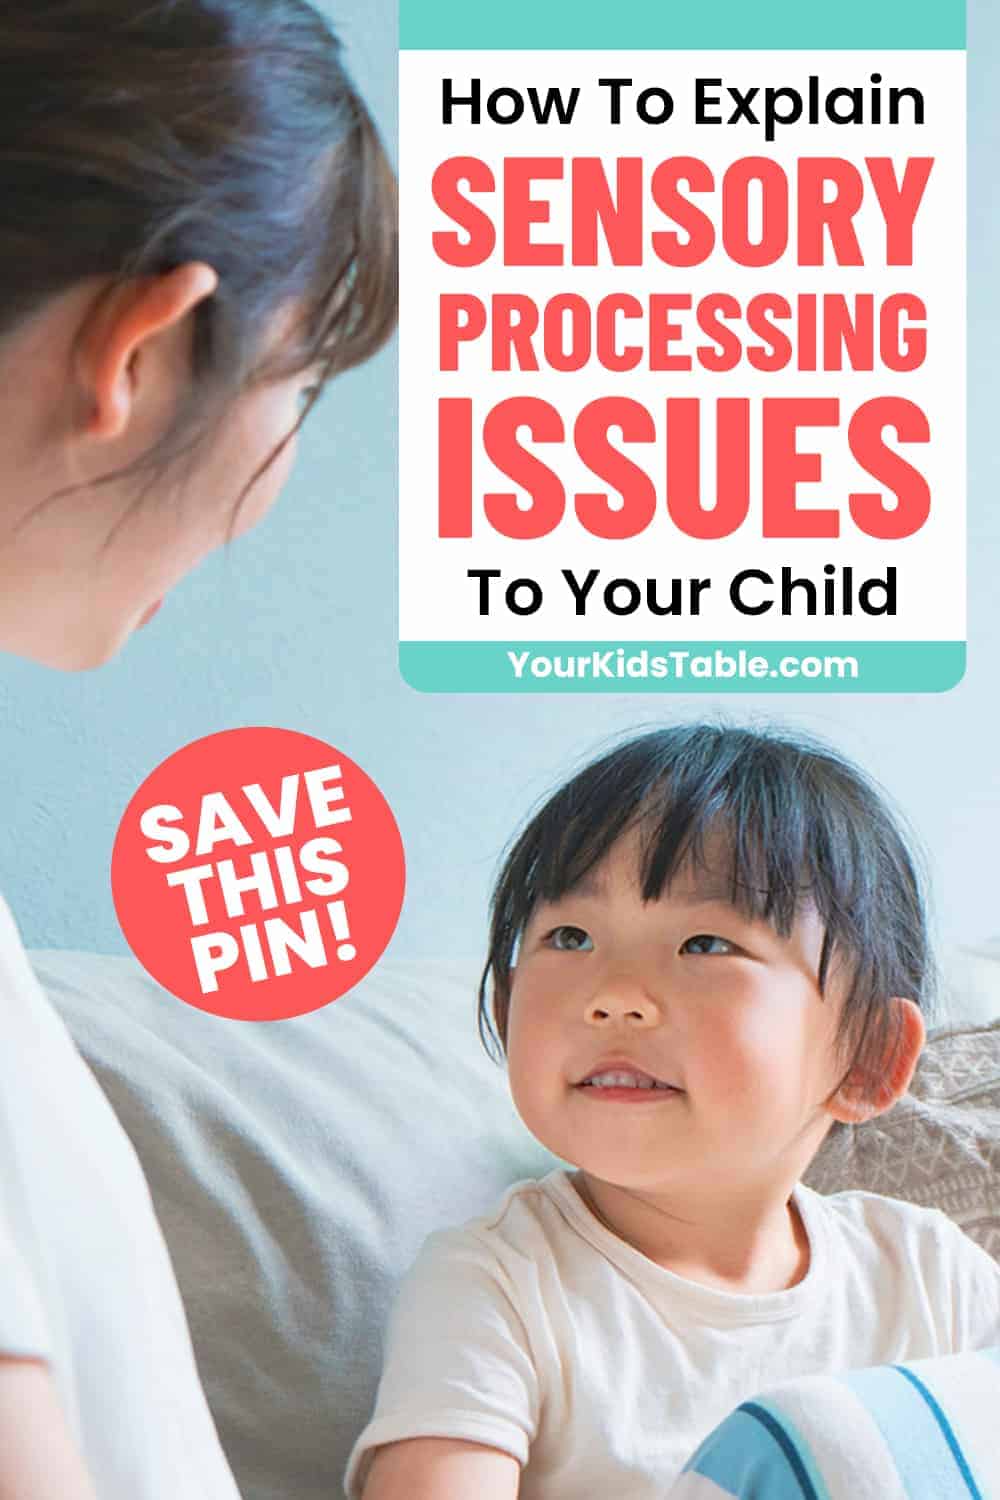 Teaching your child about sensory processing issues or Sensory Processing Disorder helps kids feel empowered and advocate for their own needs. Learn how to explain it all simply to your child! 